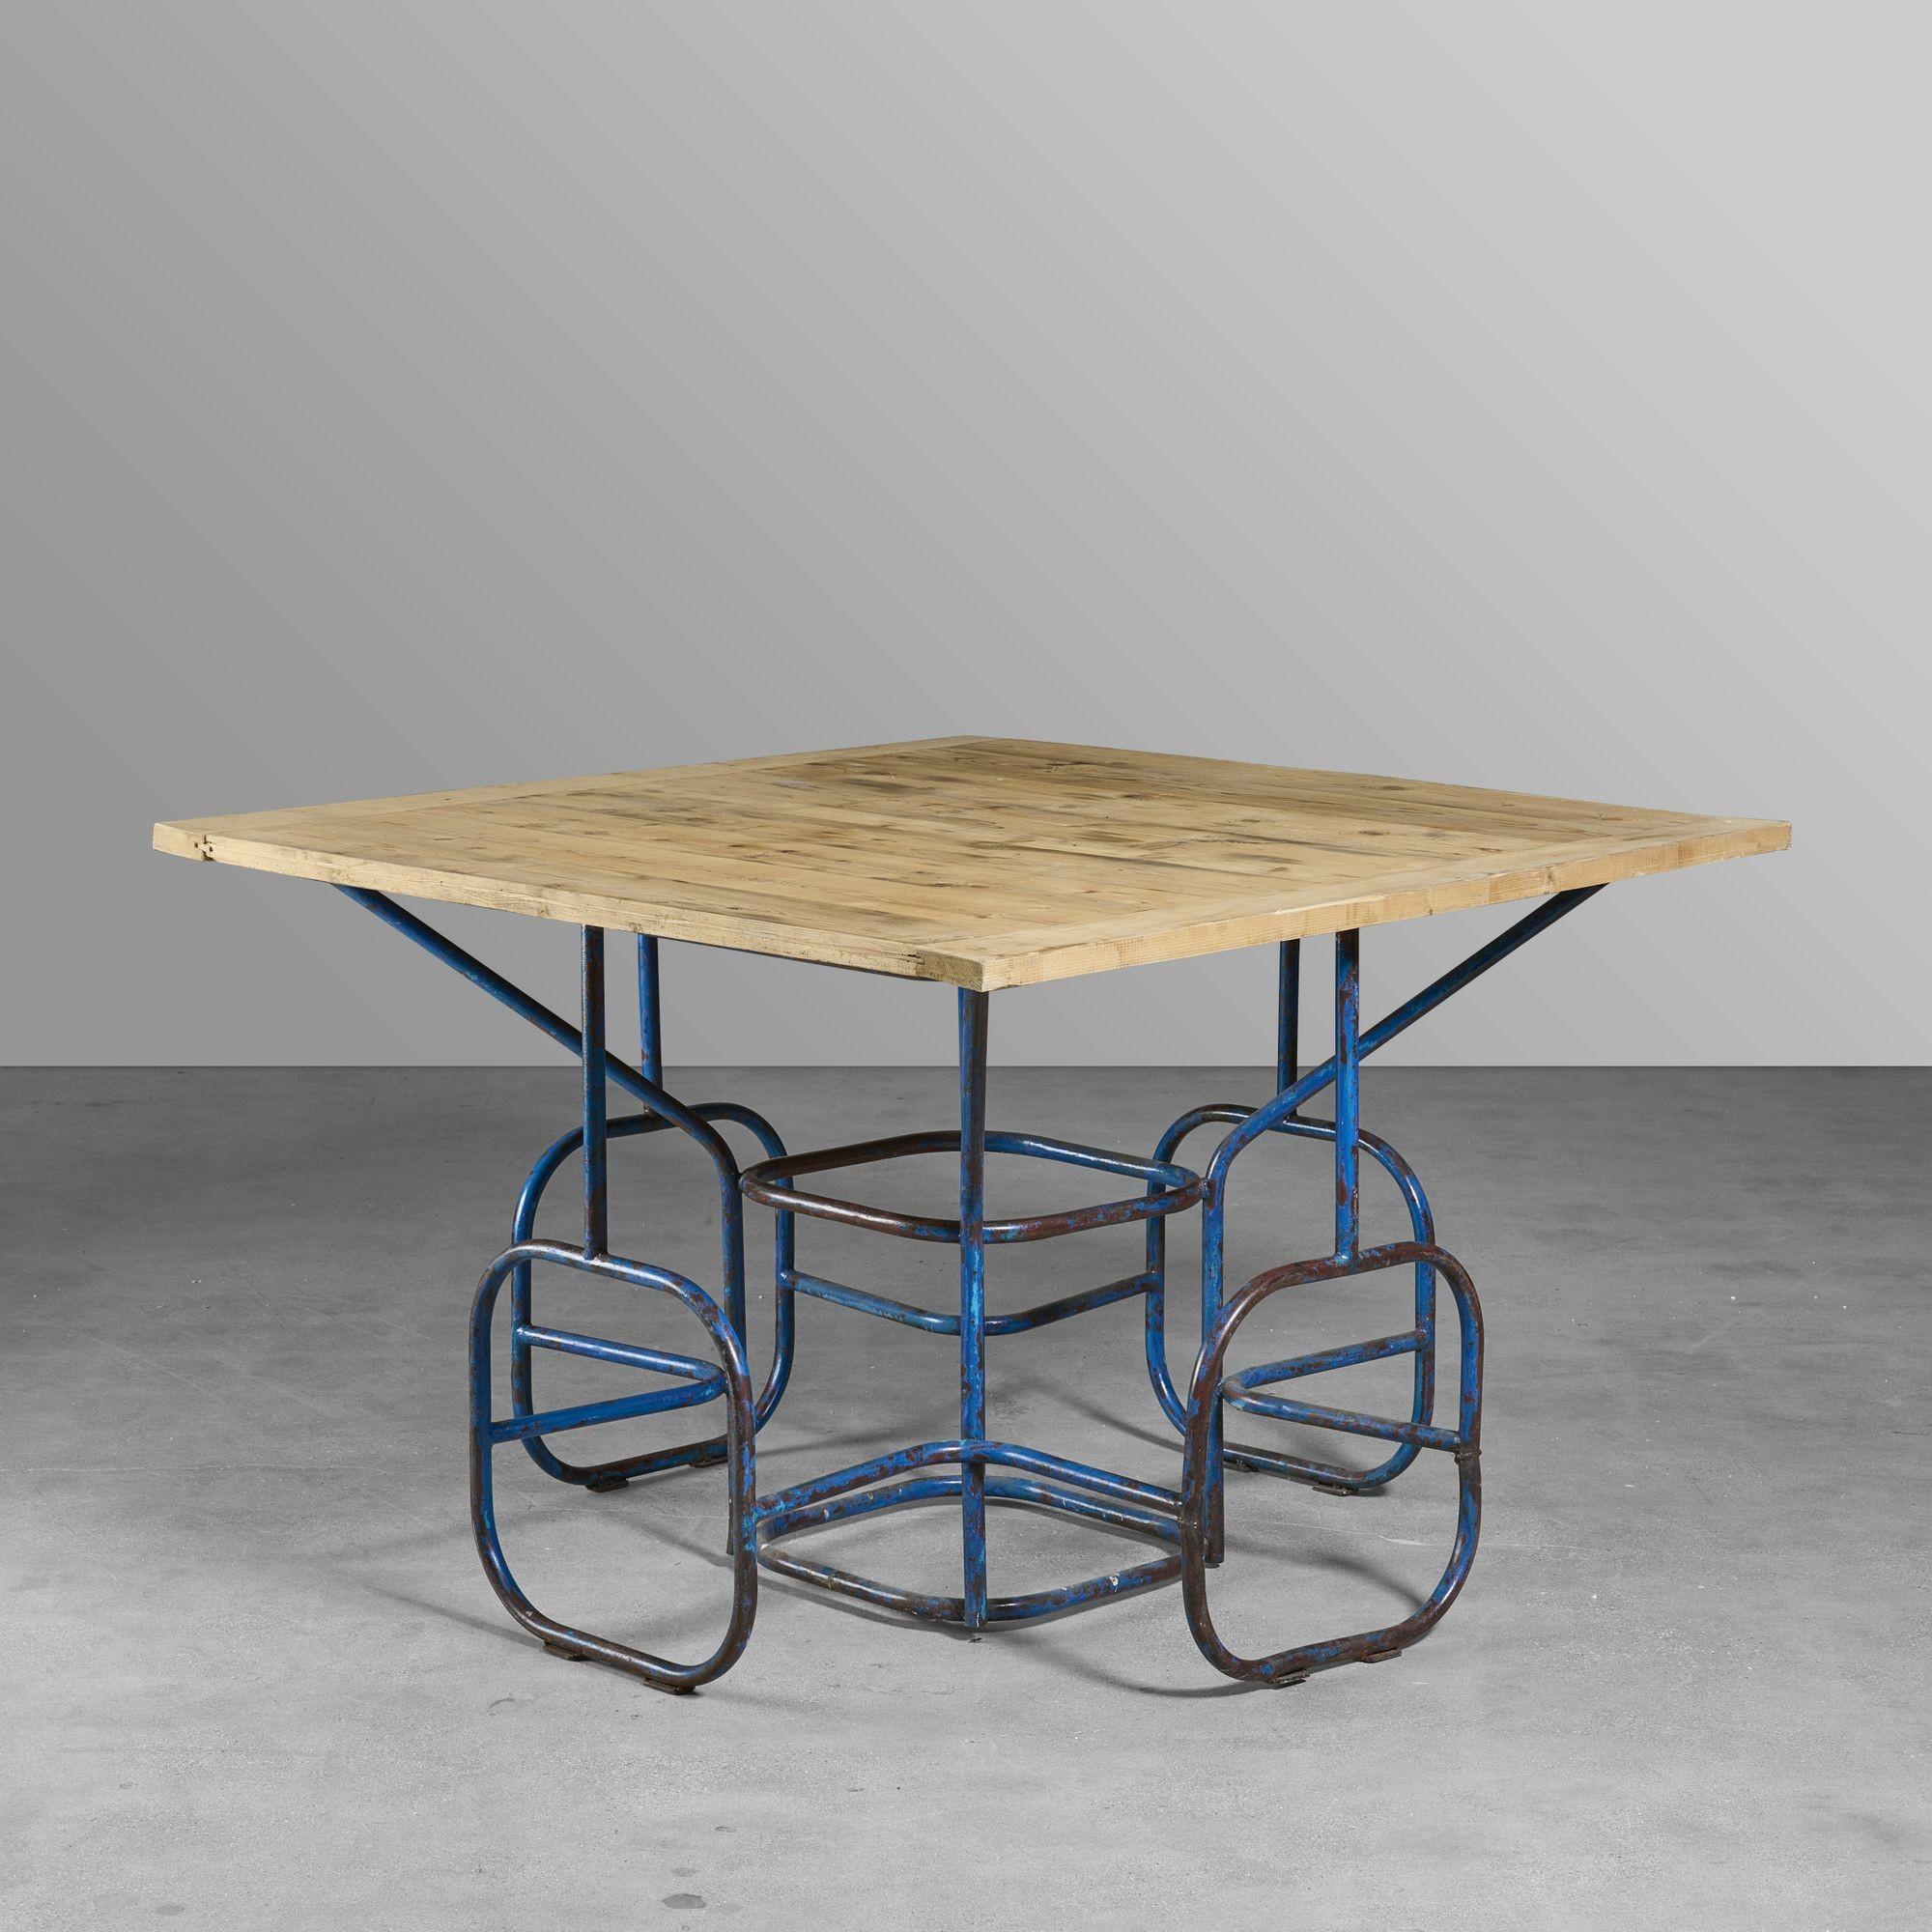 Mid century, bent iron table with pine top. Great design and seating configuration.